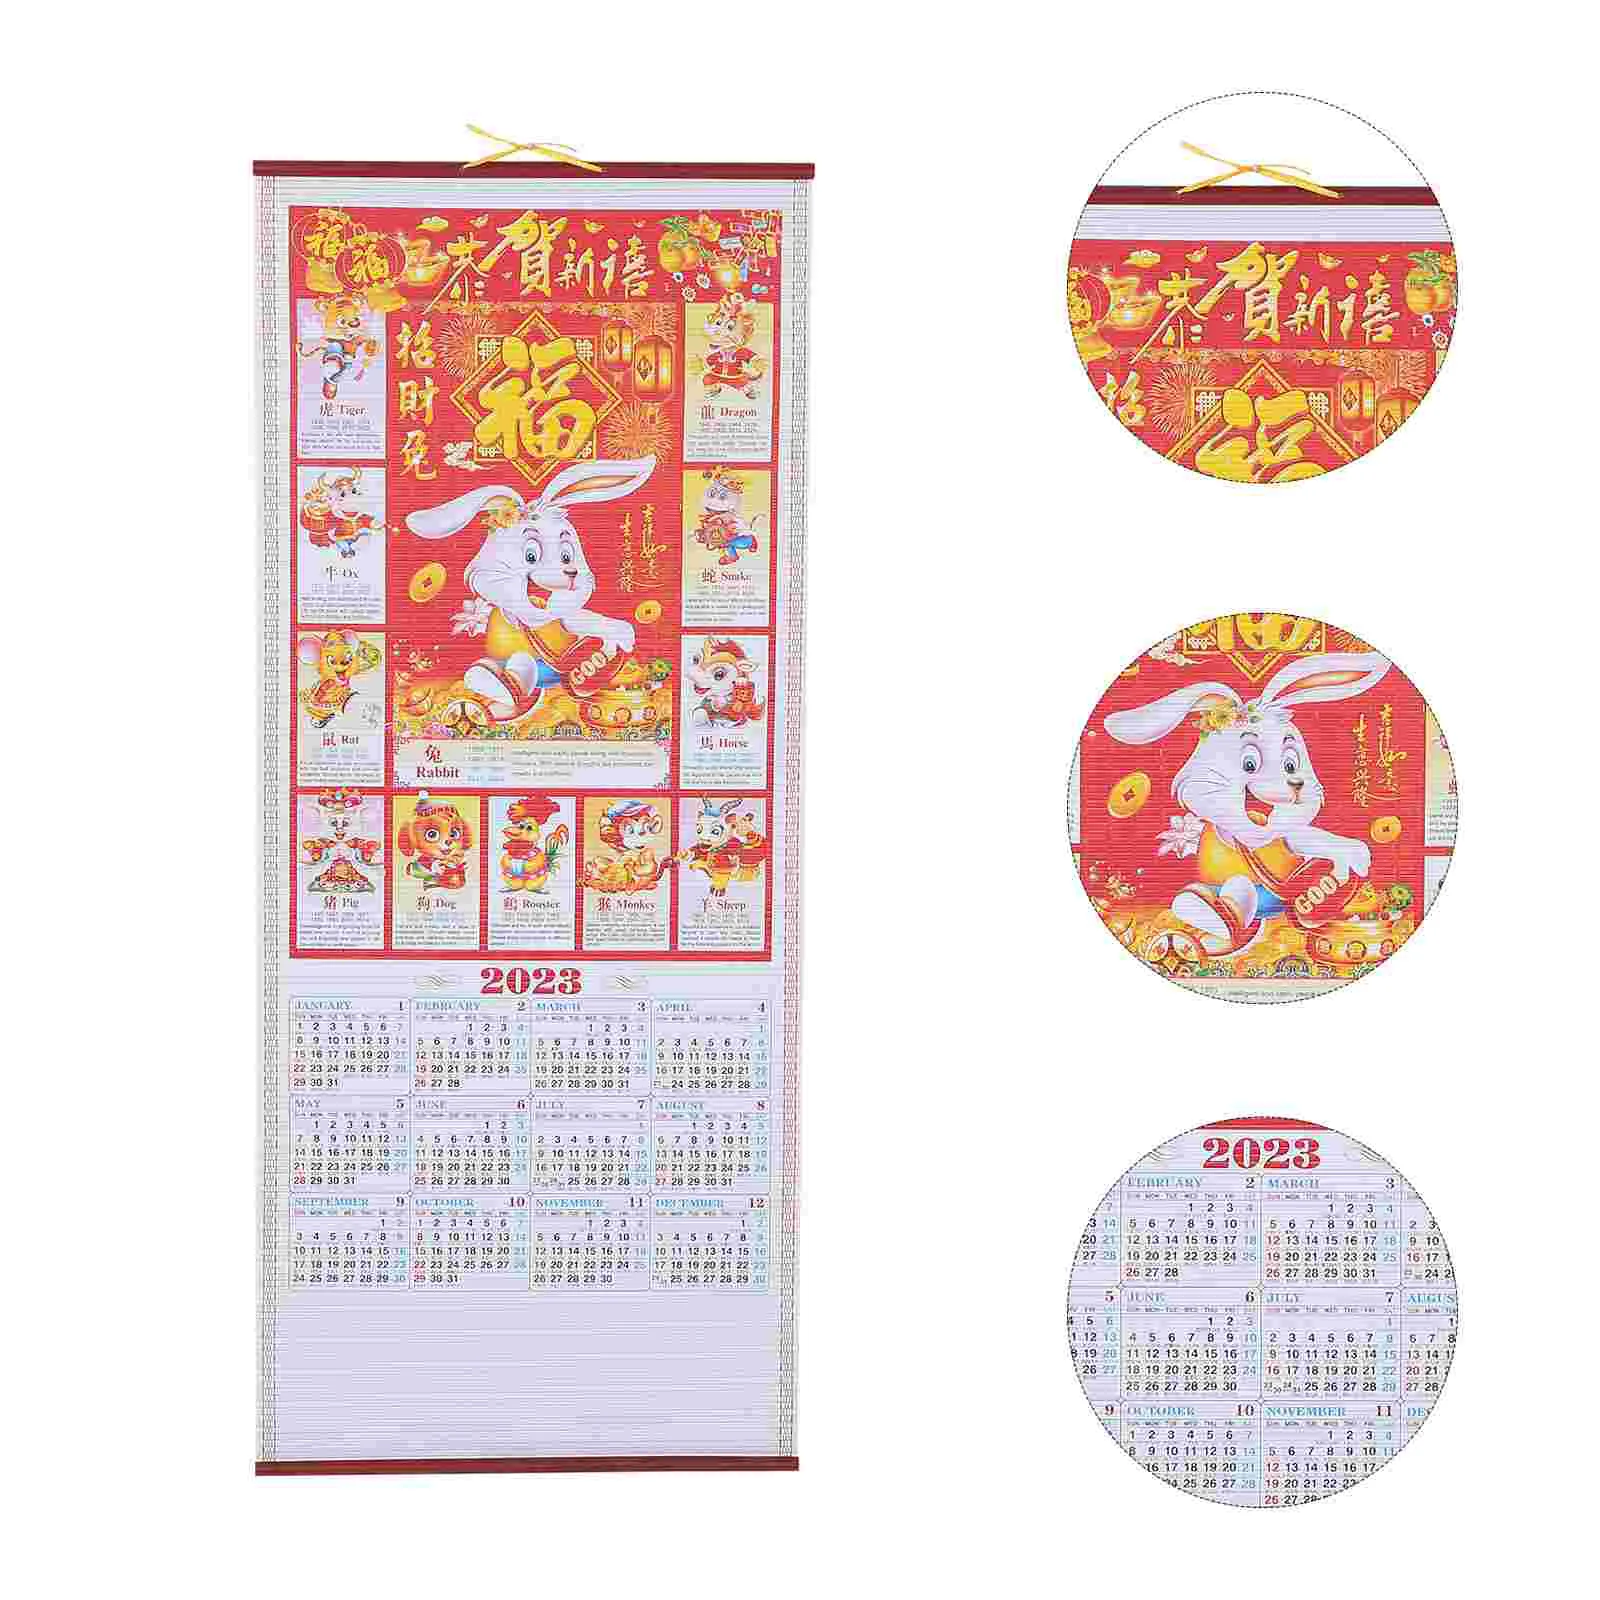 

Calendar Wall Chinese Year New Planner Scrollrabbit Zodiac Poster Tradition Calendars Lunar Yearly 2023